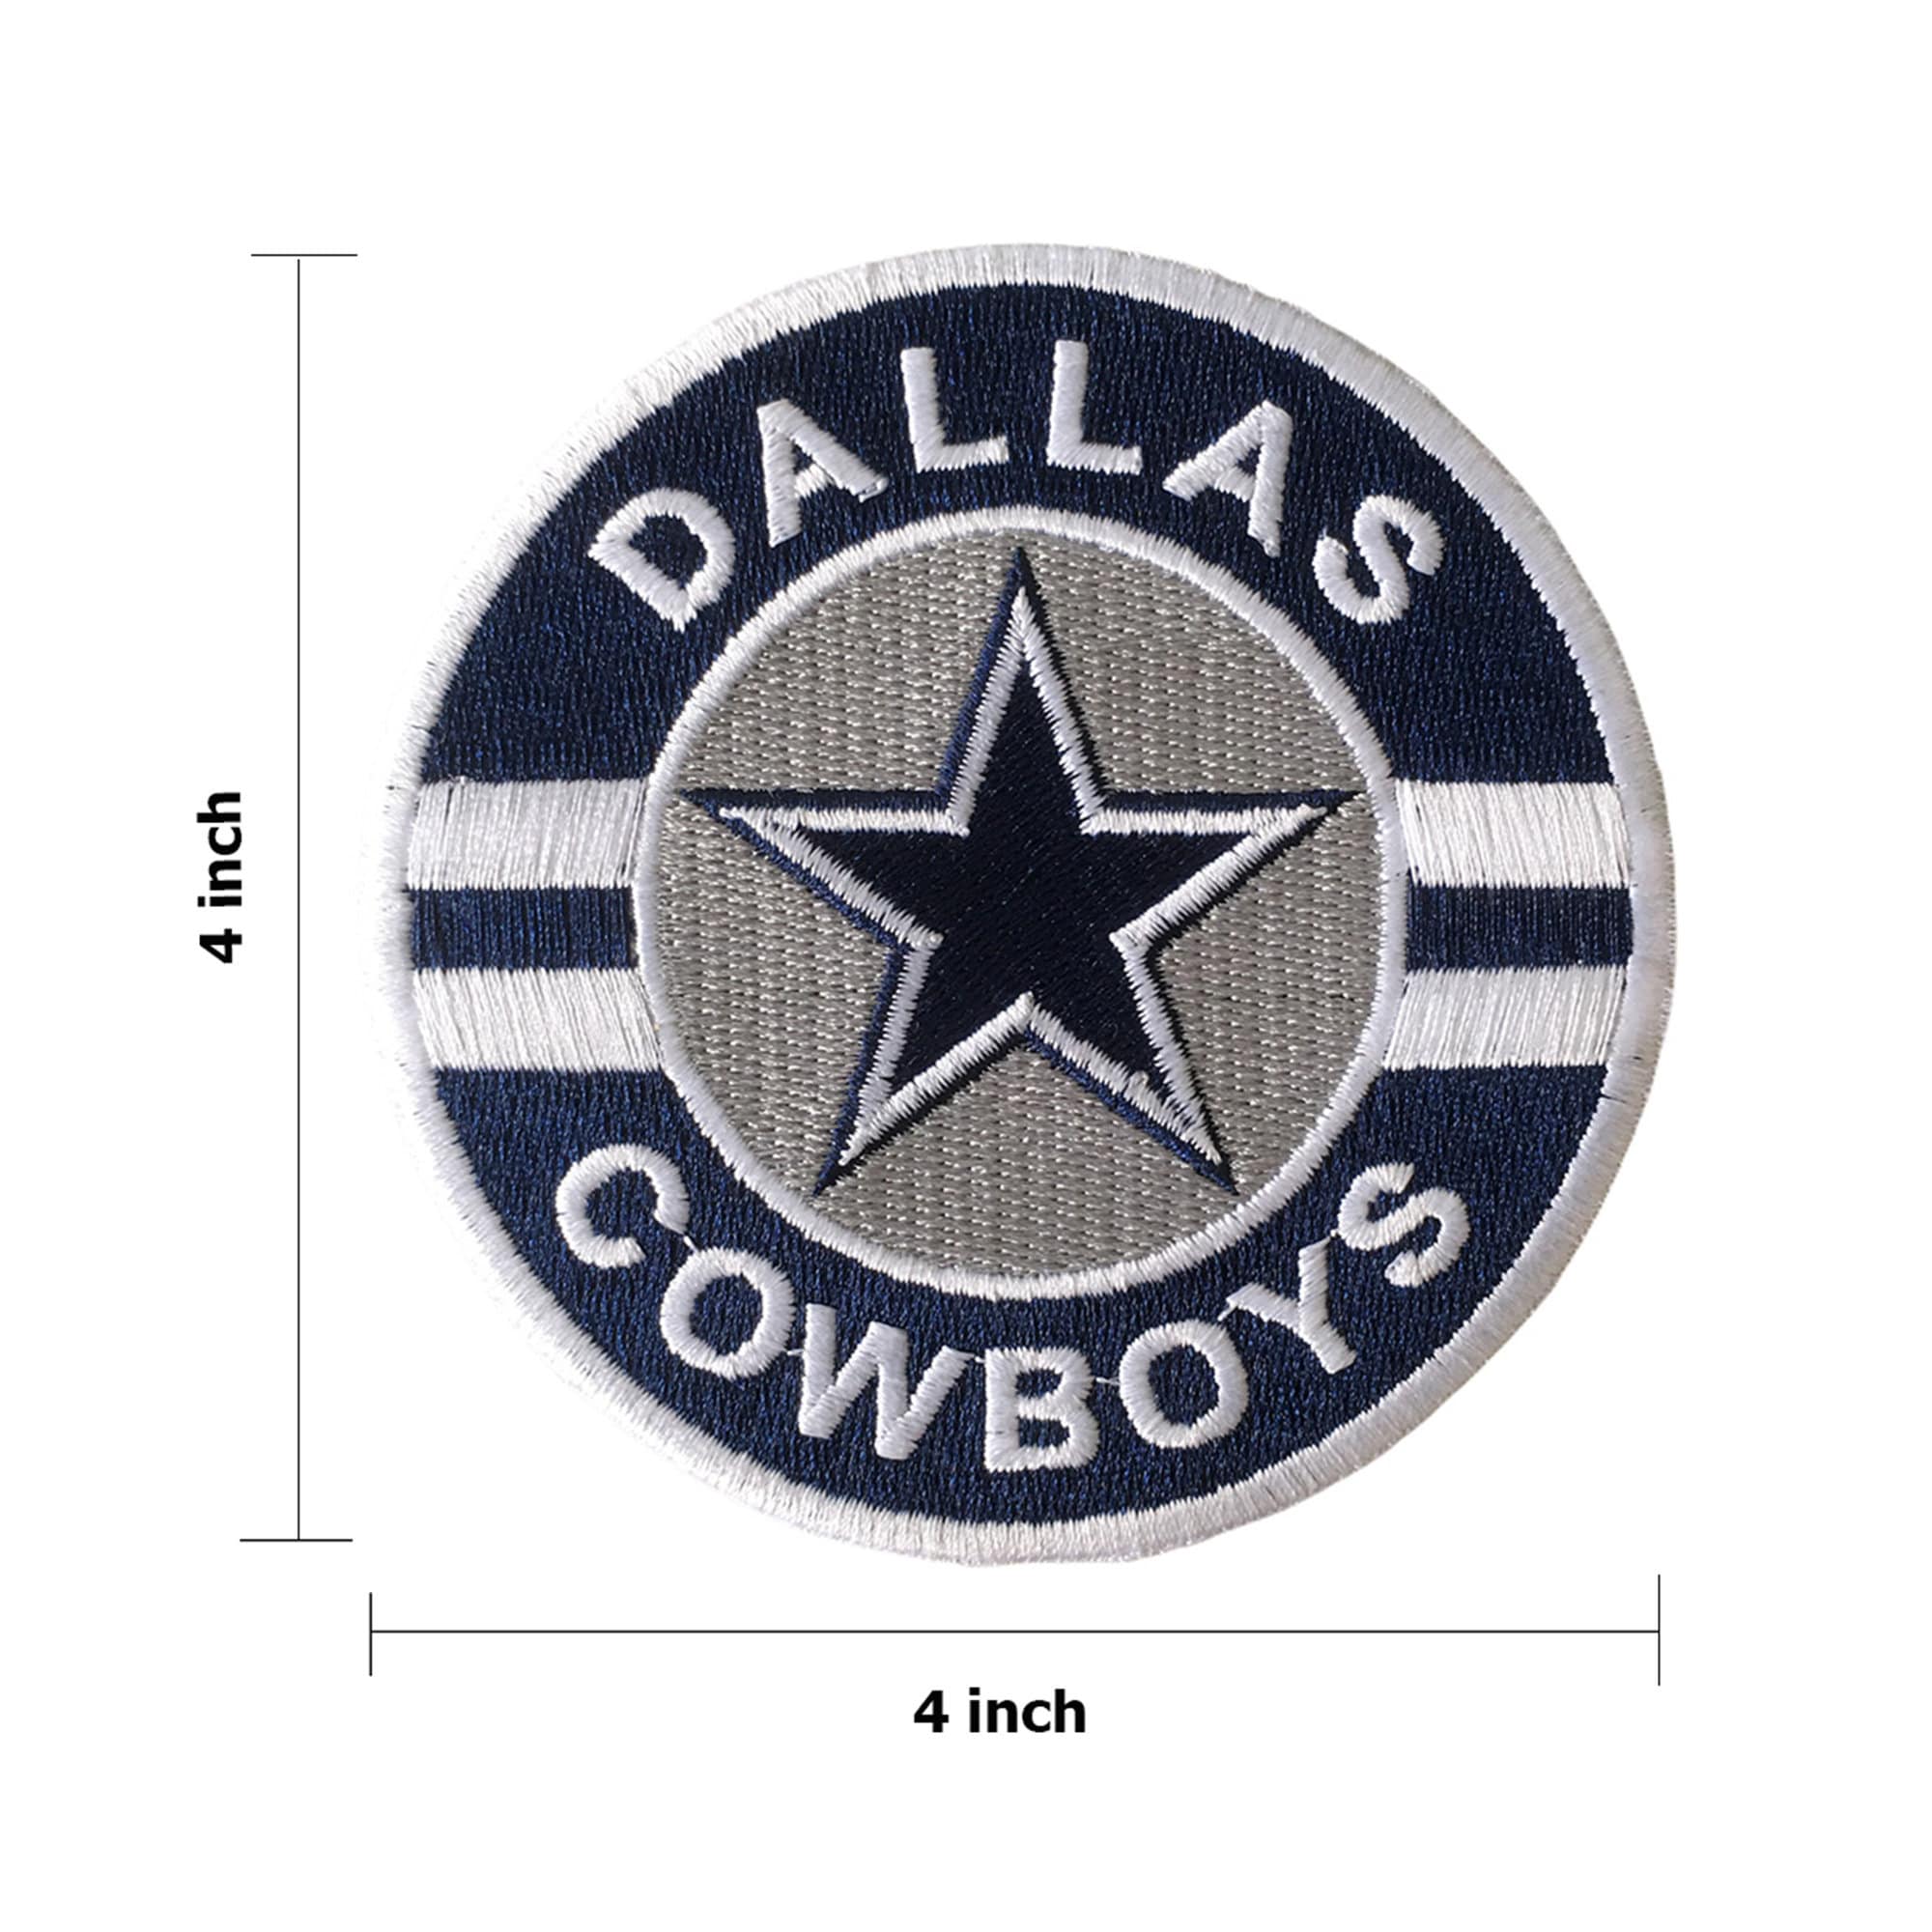 DALLAS COWBOYS EMBROIDERED IRON ON PATCH NFL FOOTBALL